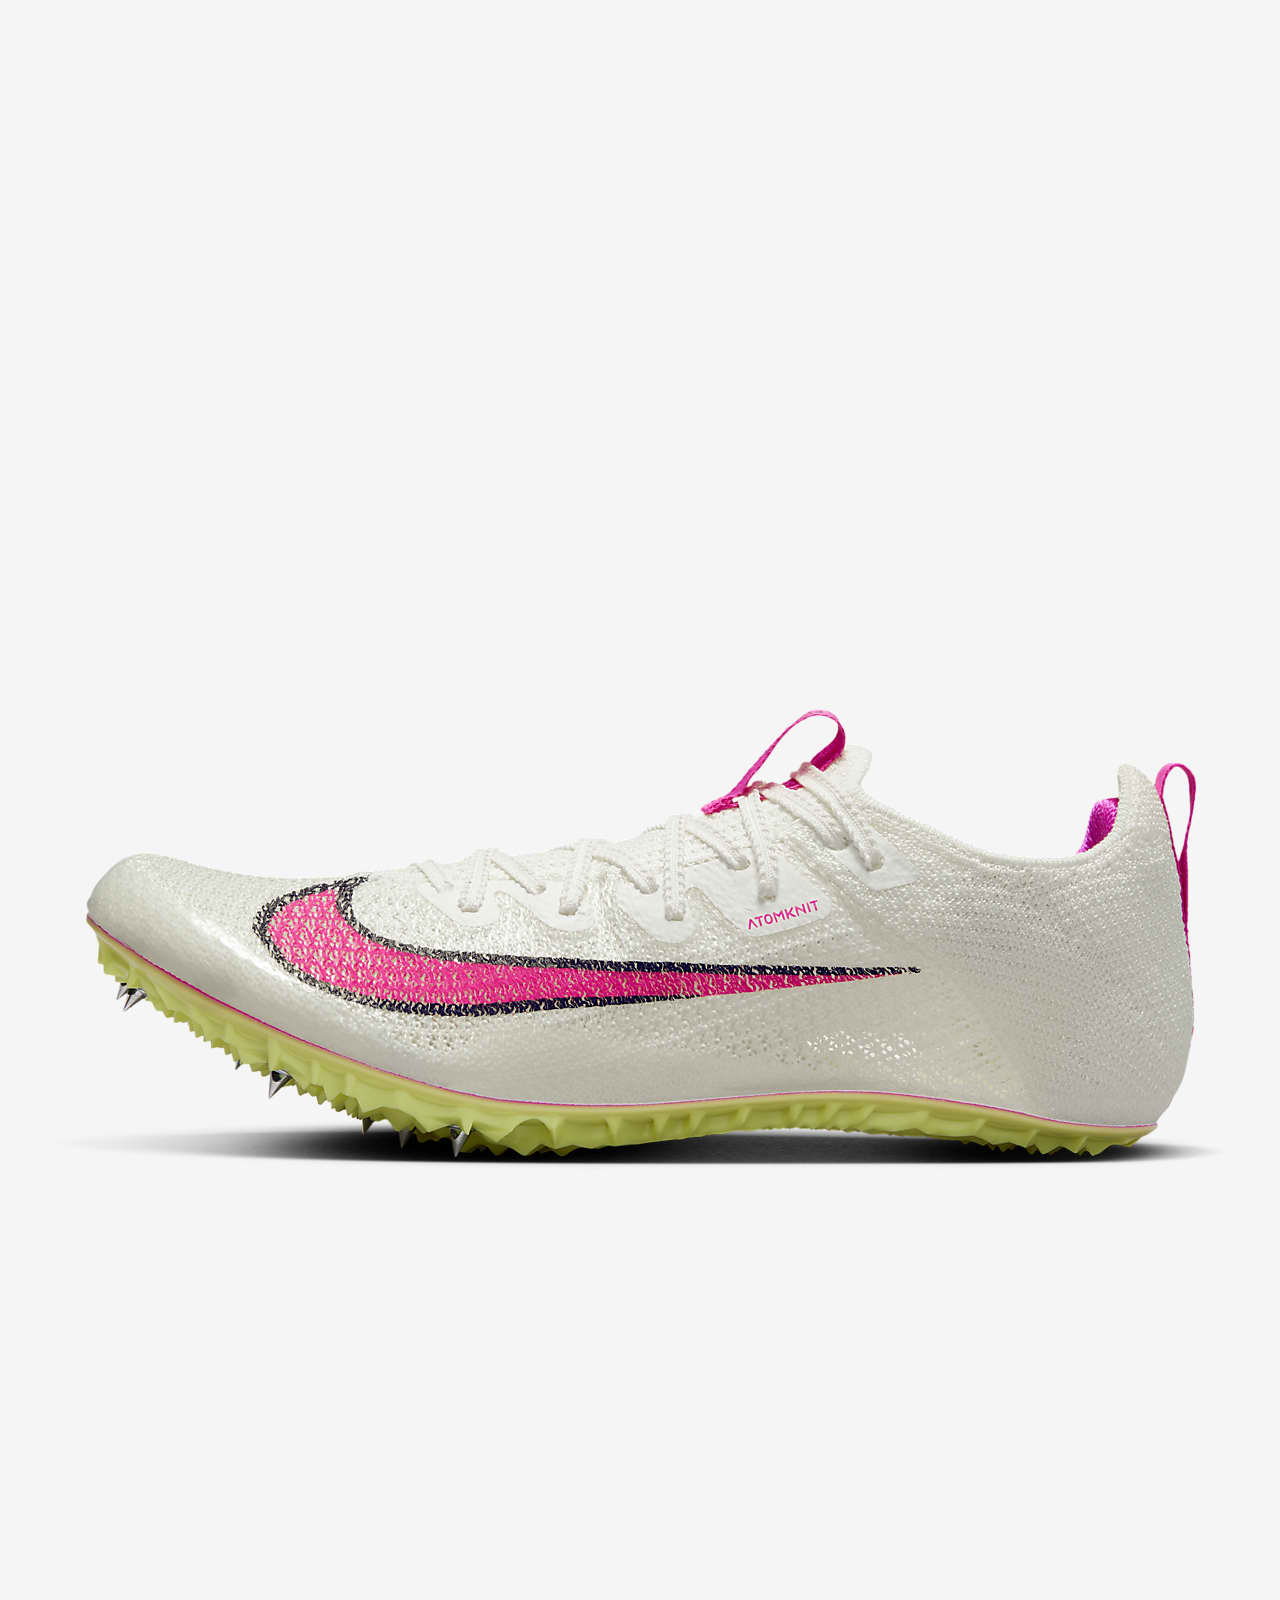 Nike Zoom Superfly Elite 2 Field and Track sprint spikes